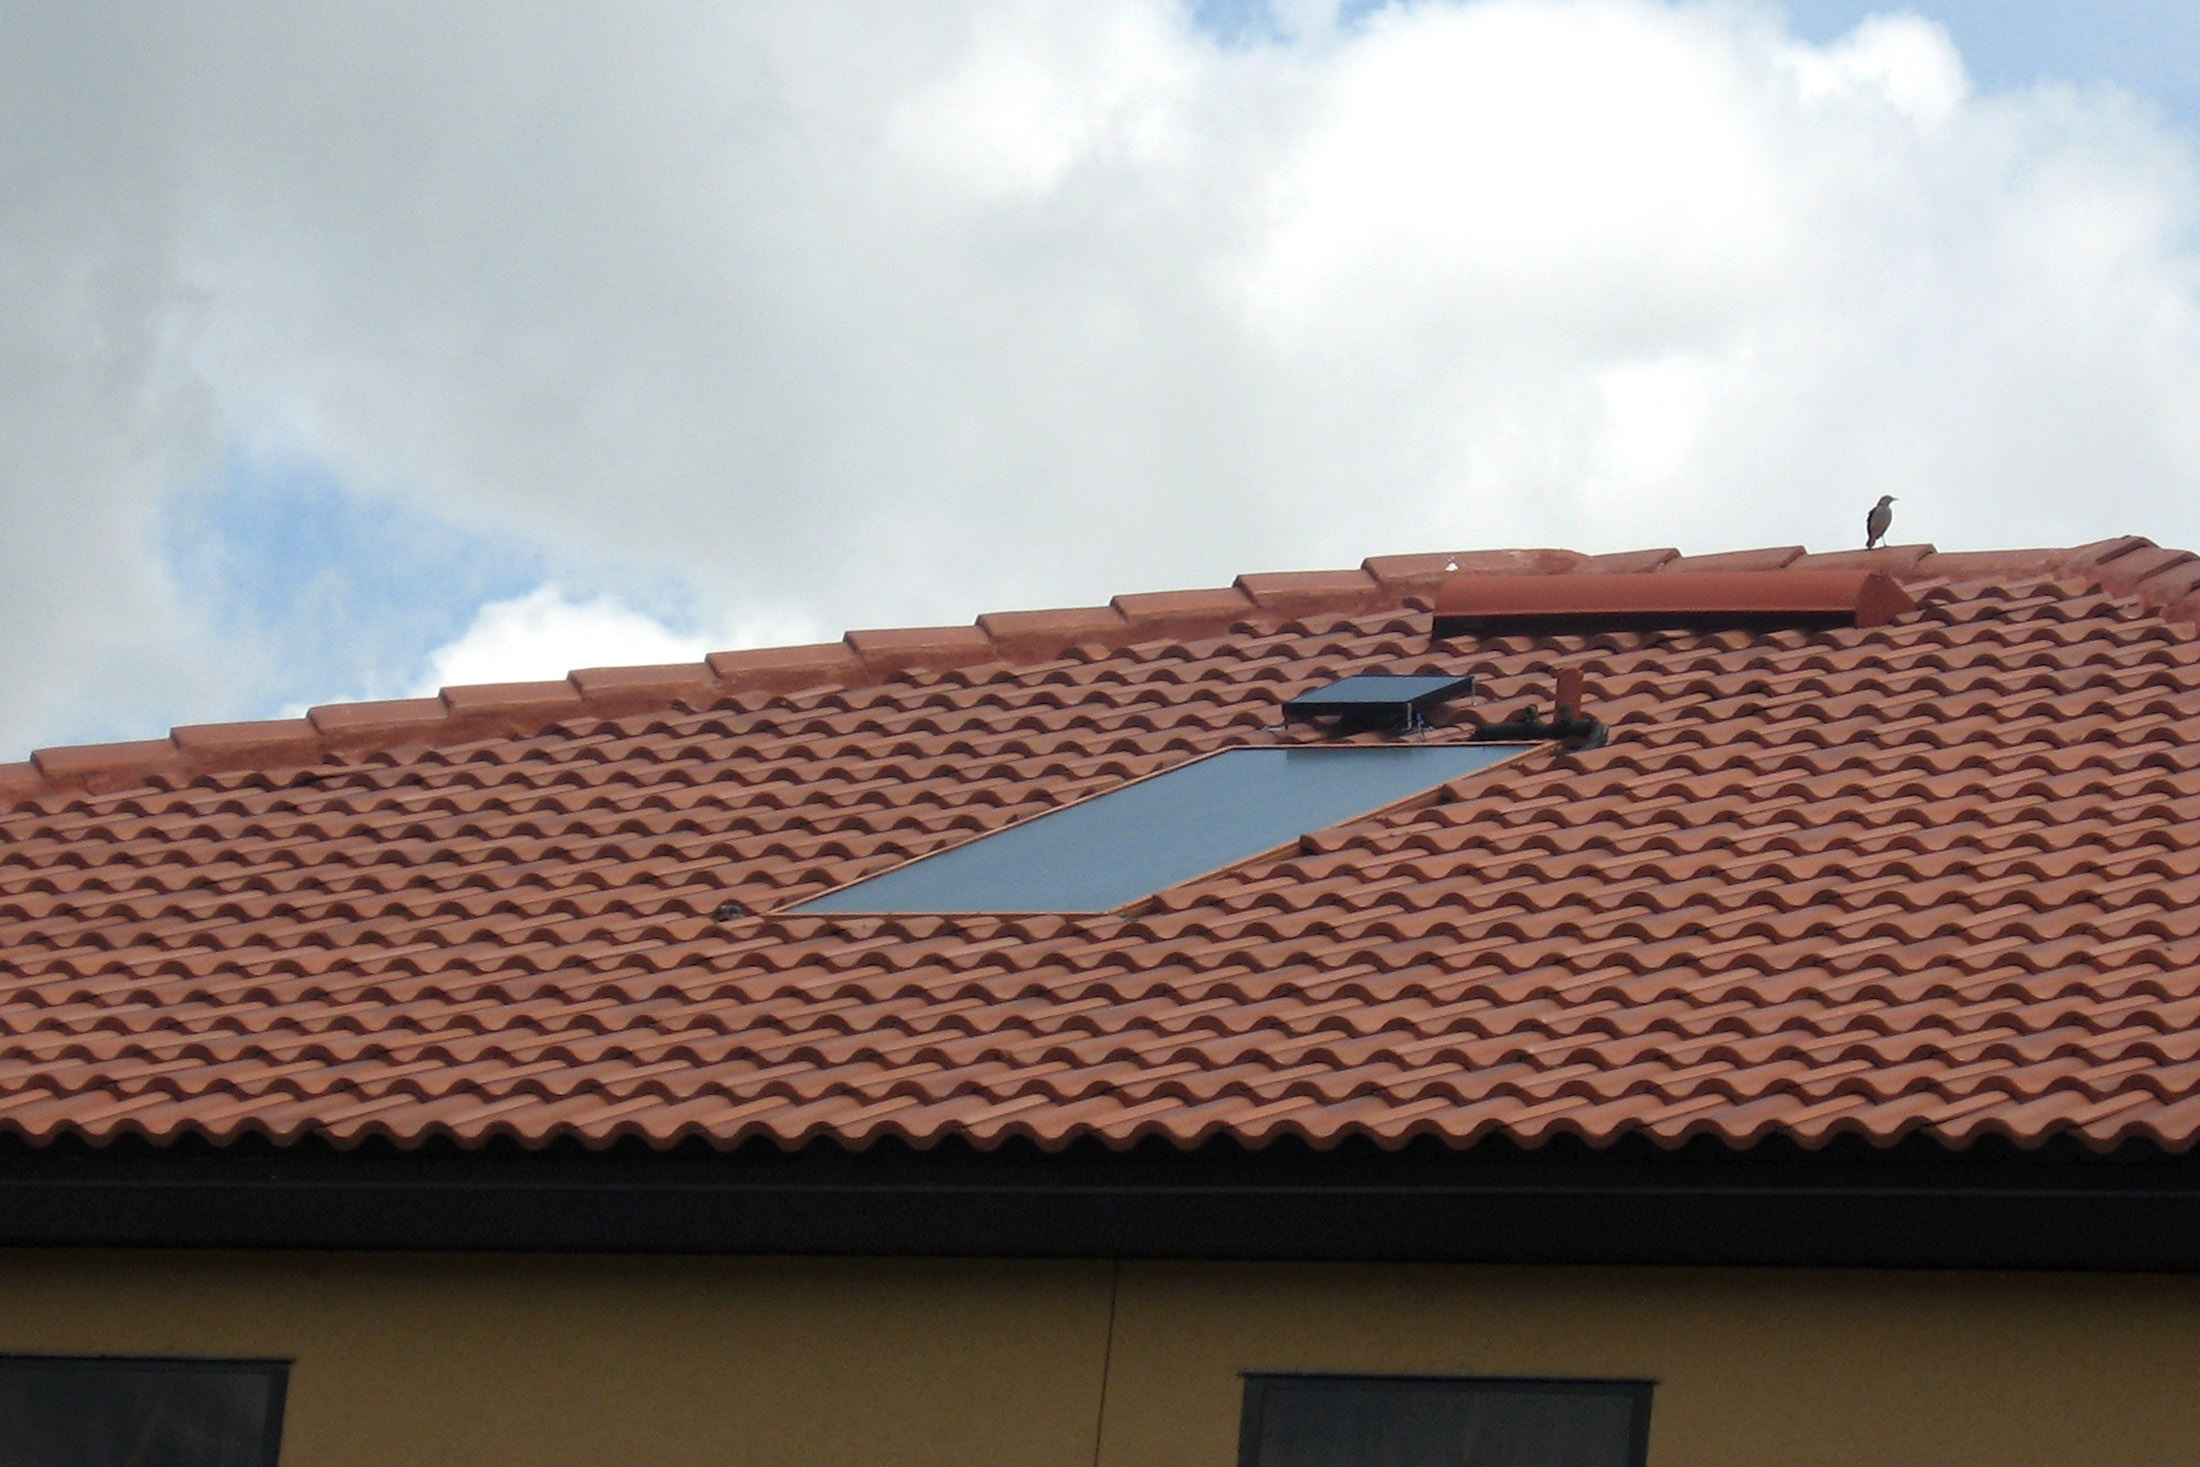 Solar water heating panels can be installed on different roofing materials, such as this red barrel tile, and can have pumps powered by a small photovoltaic panel.